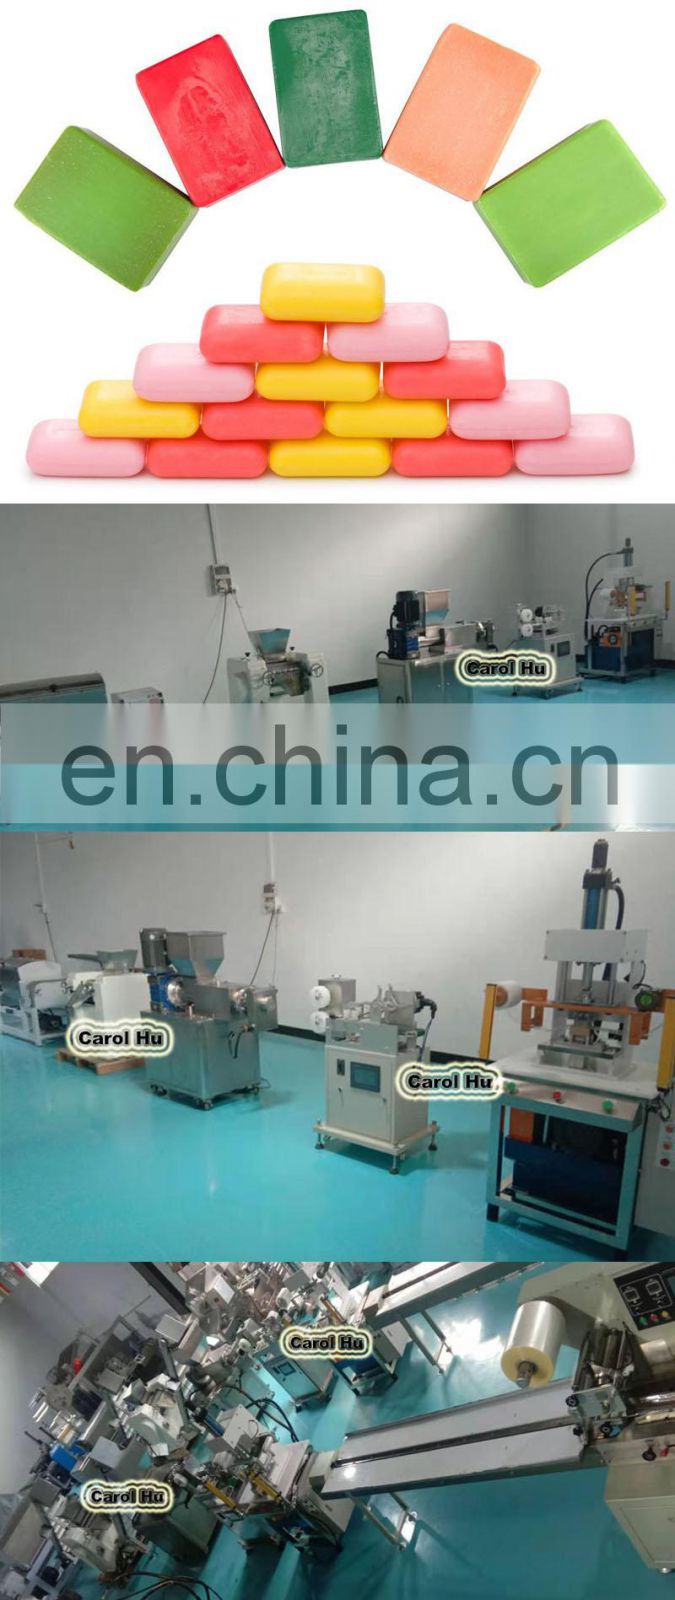 30 50 100 200 KG small scale bar laundry toilet soap making equipment